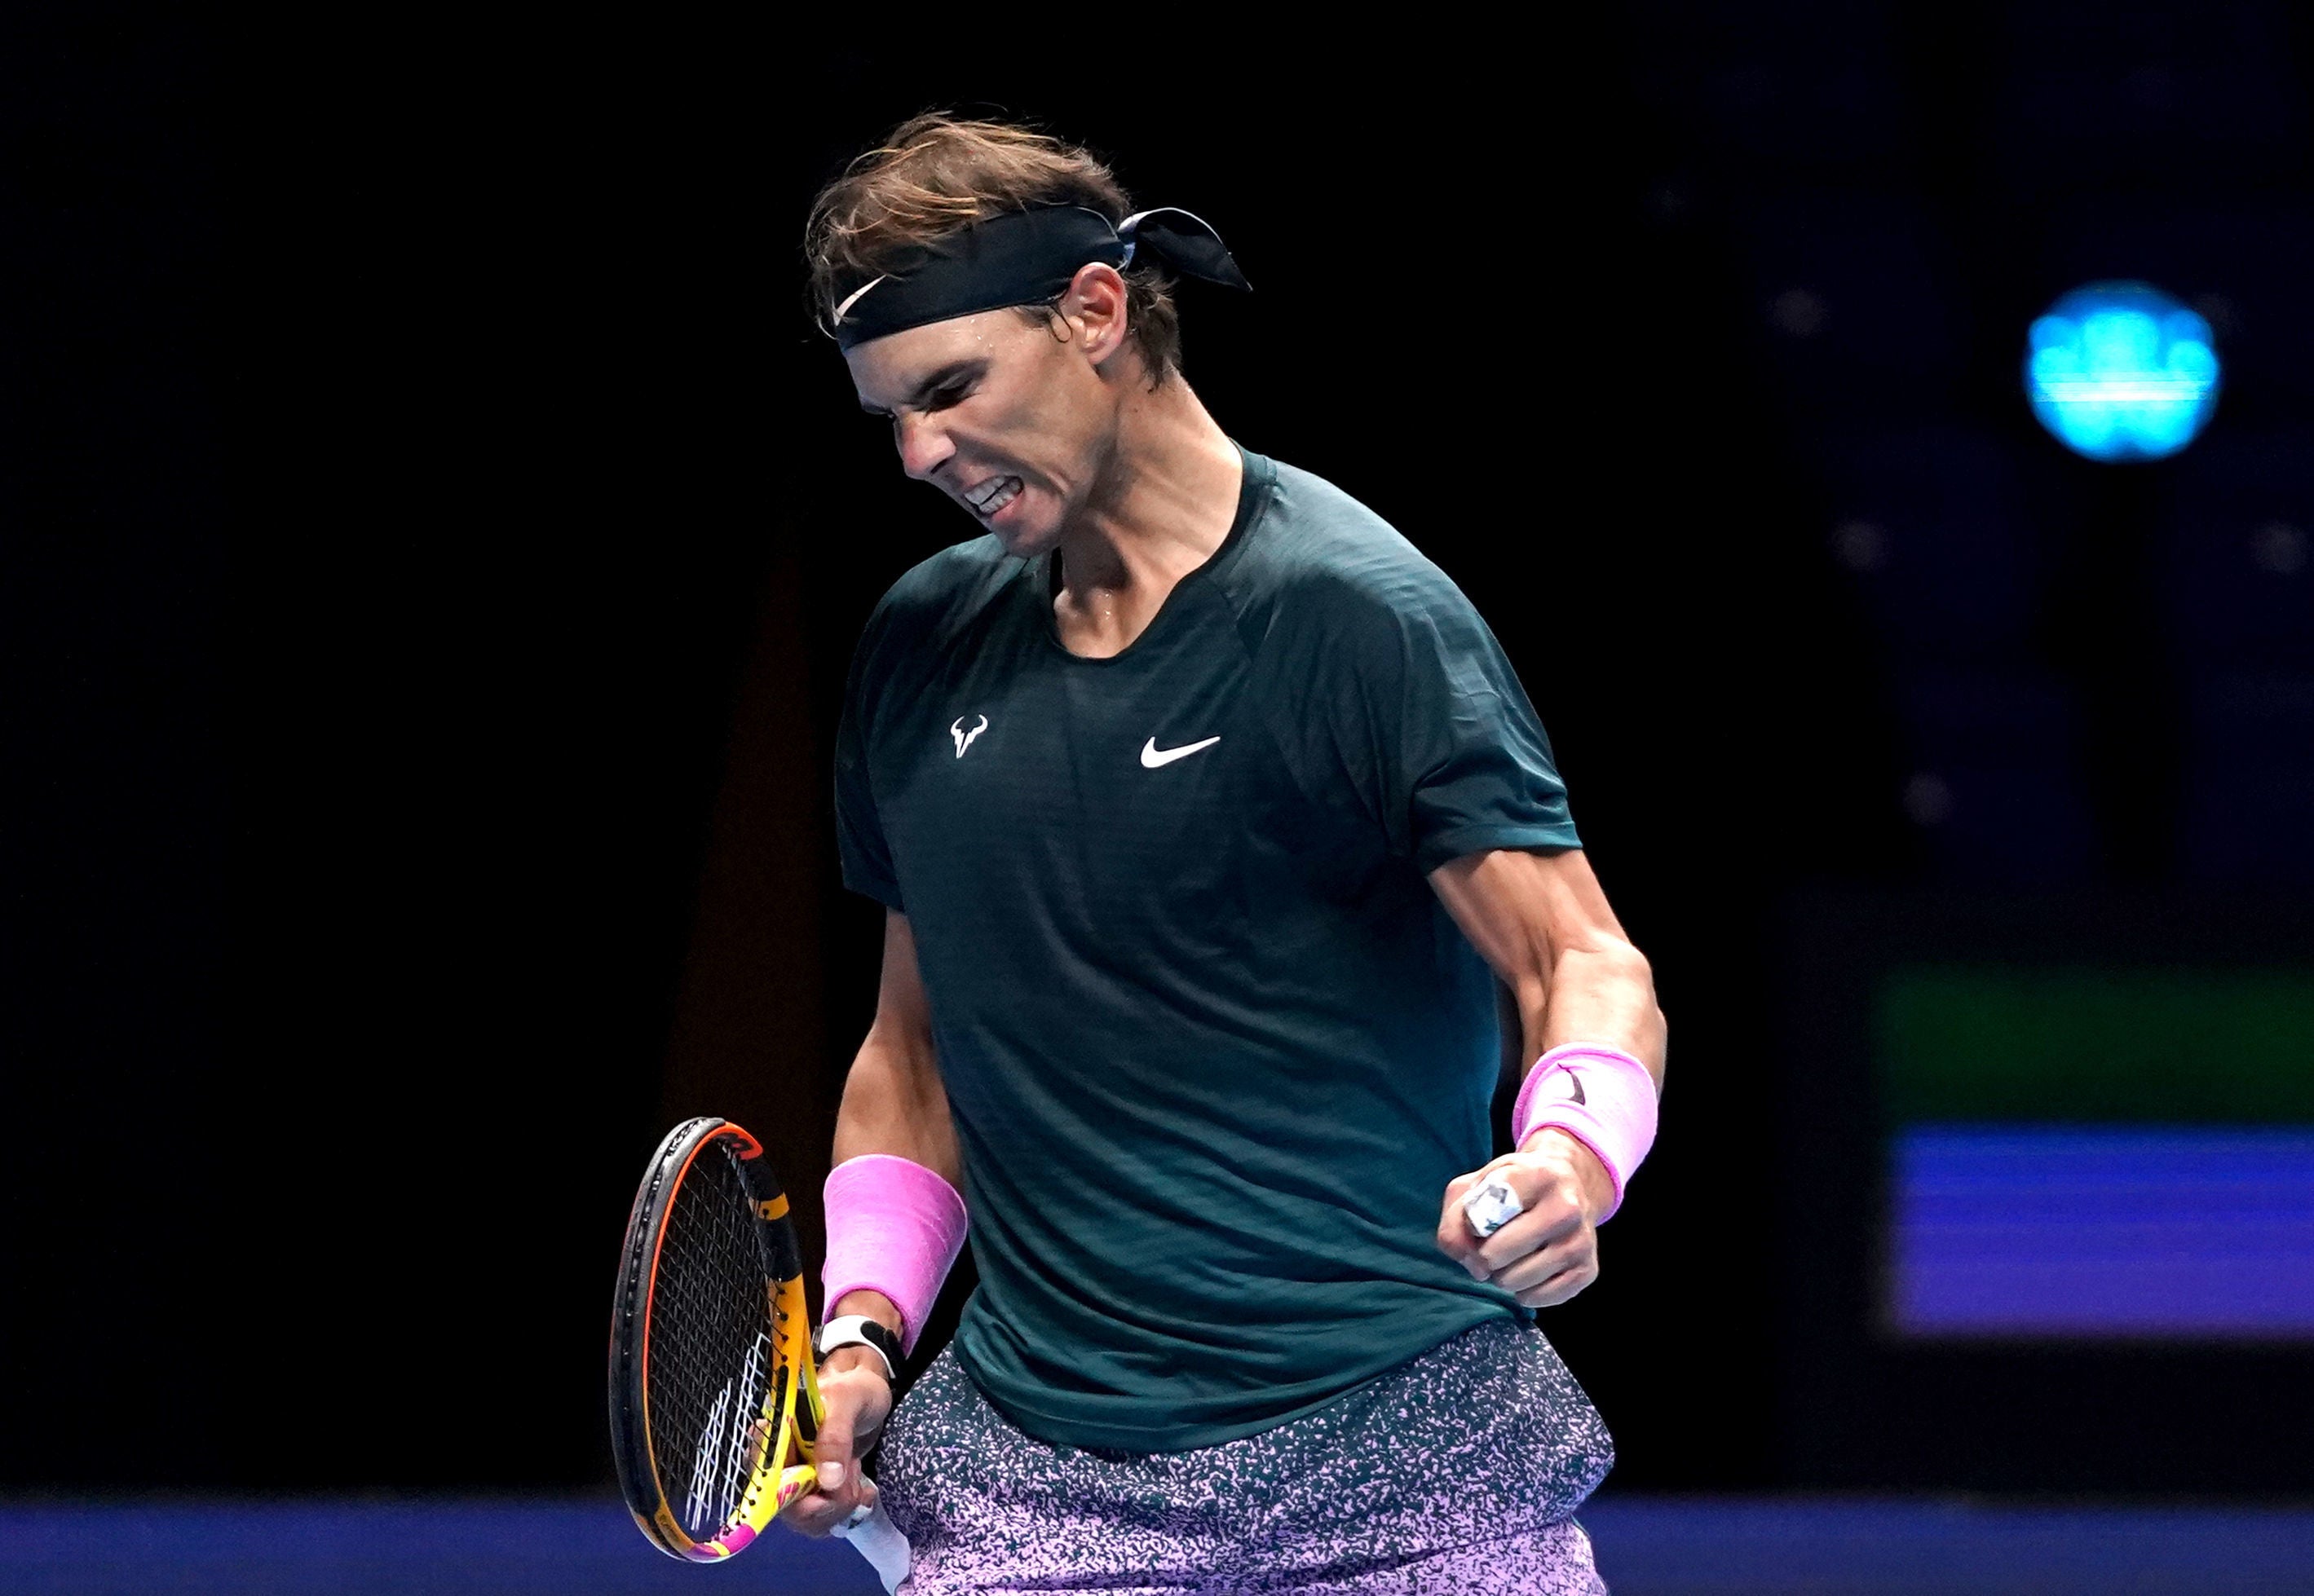 Rafael Nadal celebrates his victory over Andrey Rublev at the ATP Finals